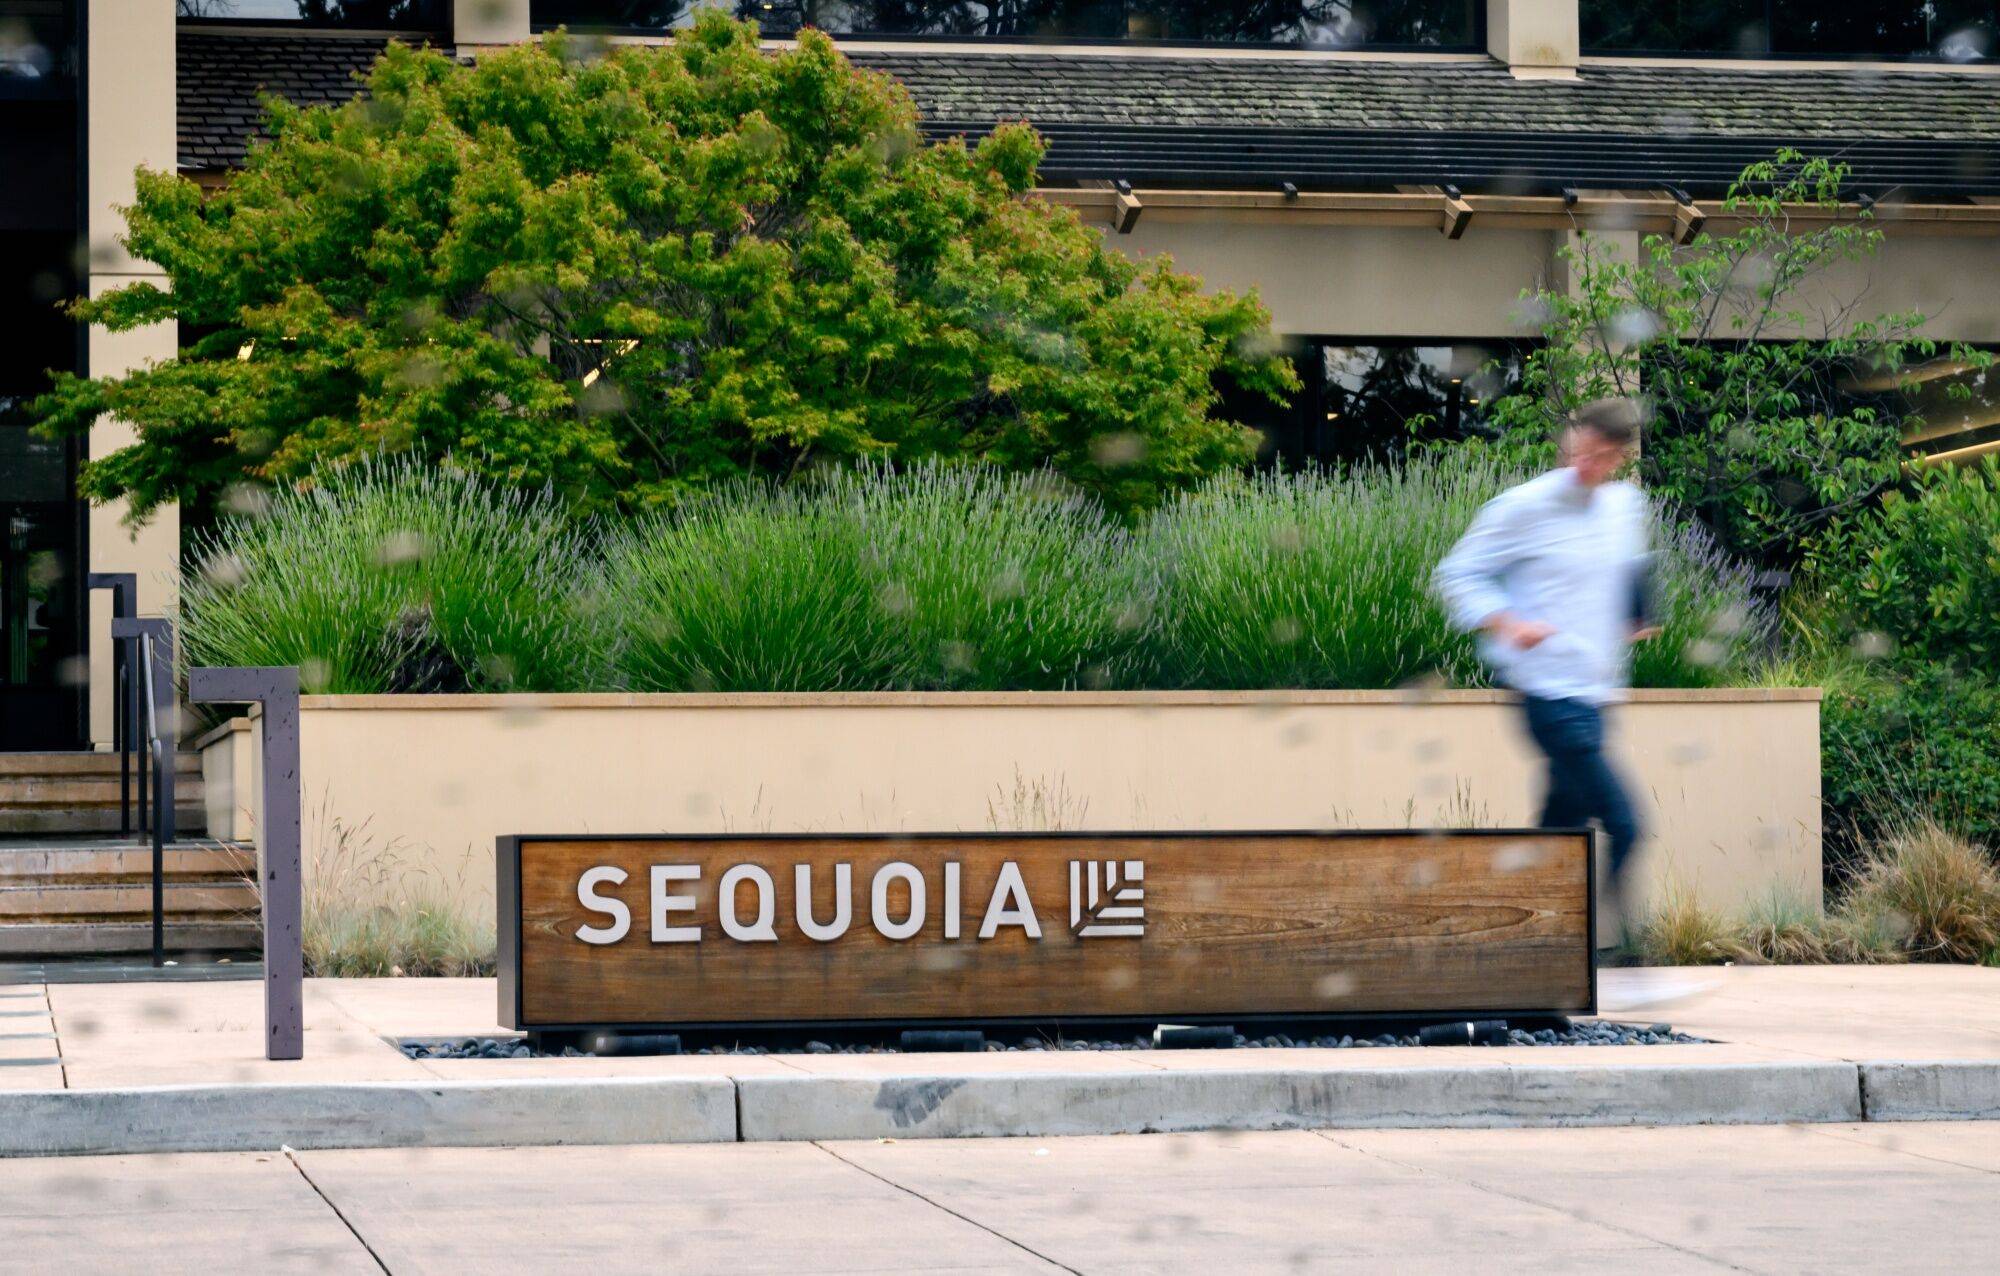 Sequoia Capital offices in Menlo Park, California, on Tuesday. Venture capital powerhouse Sequoia Capital is breaking up into three entities around the world, splitting the Chinese and U.S. operations as tensions grow between the world’s two largest economies.  | BLOOMBERG